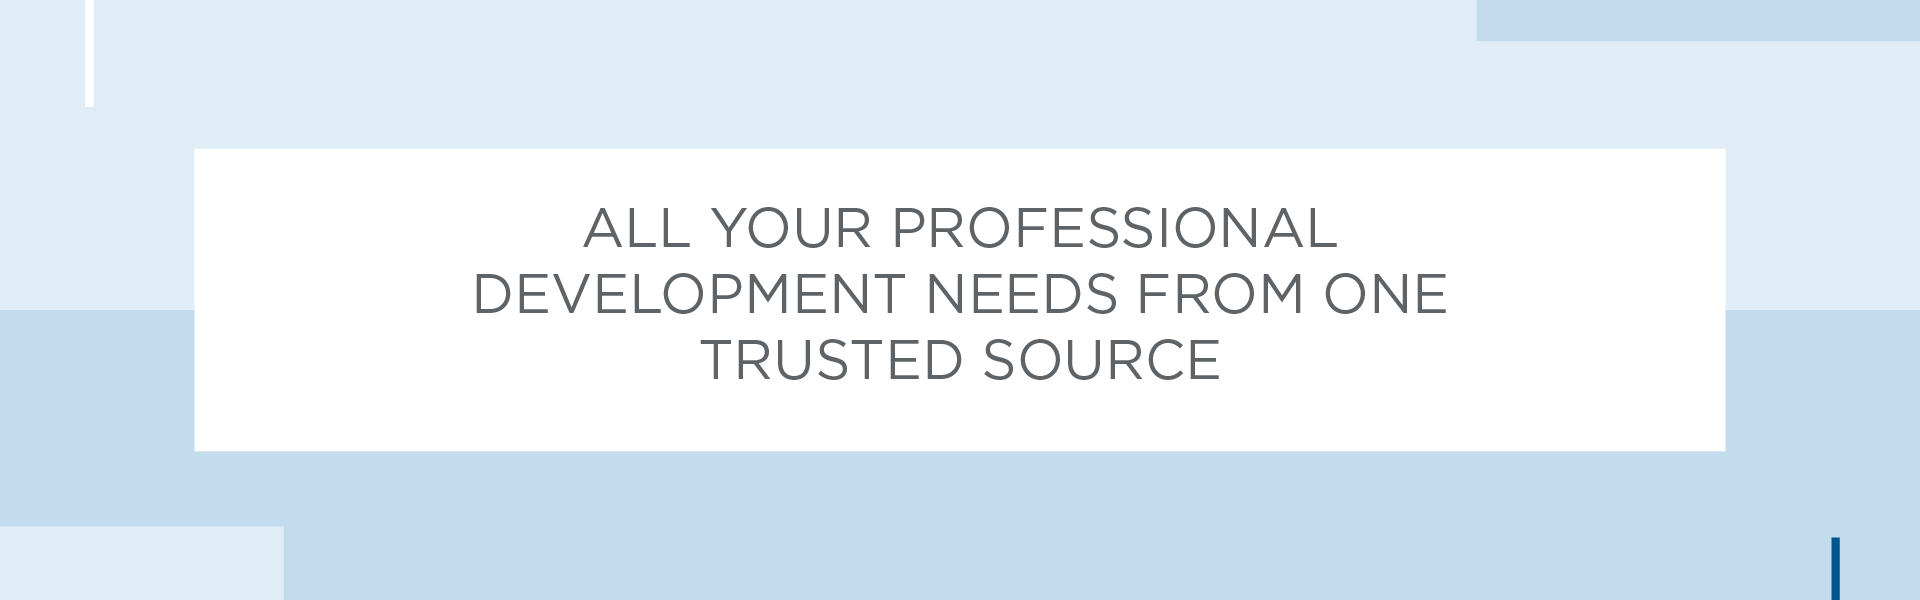 ALL YOUR PROFESSIONAL DEVELOPMENT NEEDS FROM ONE TRUSTED SOURCE